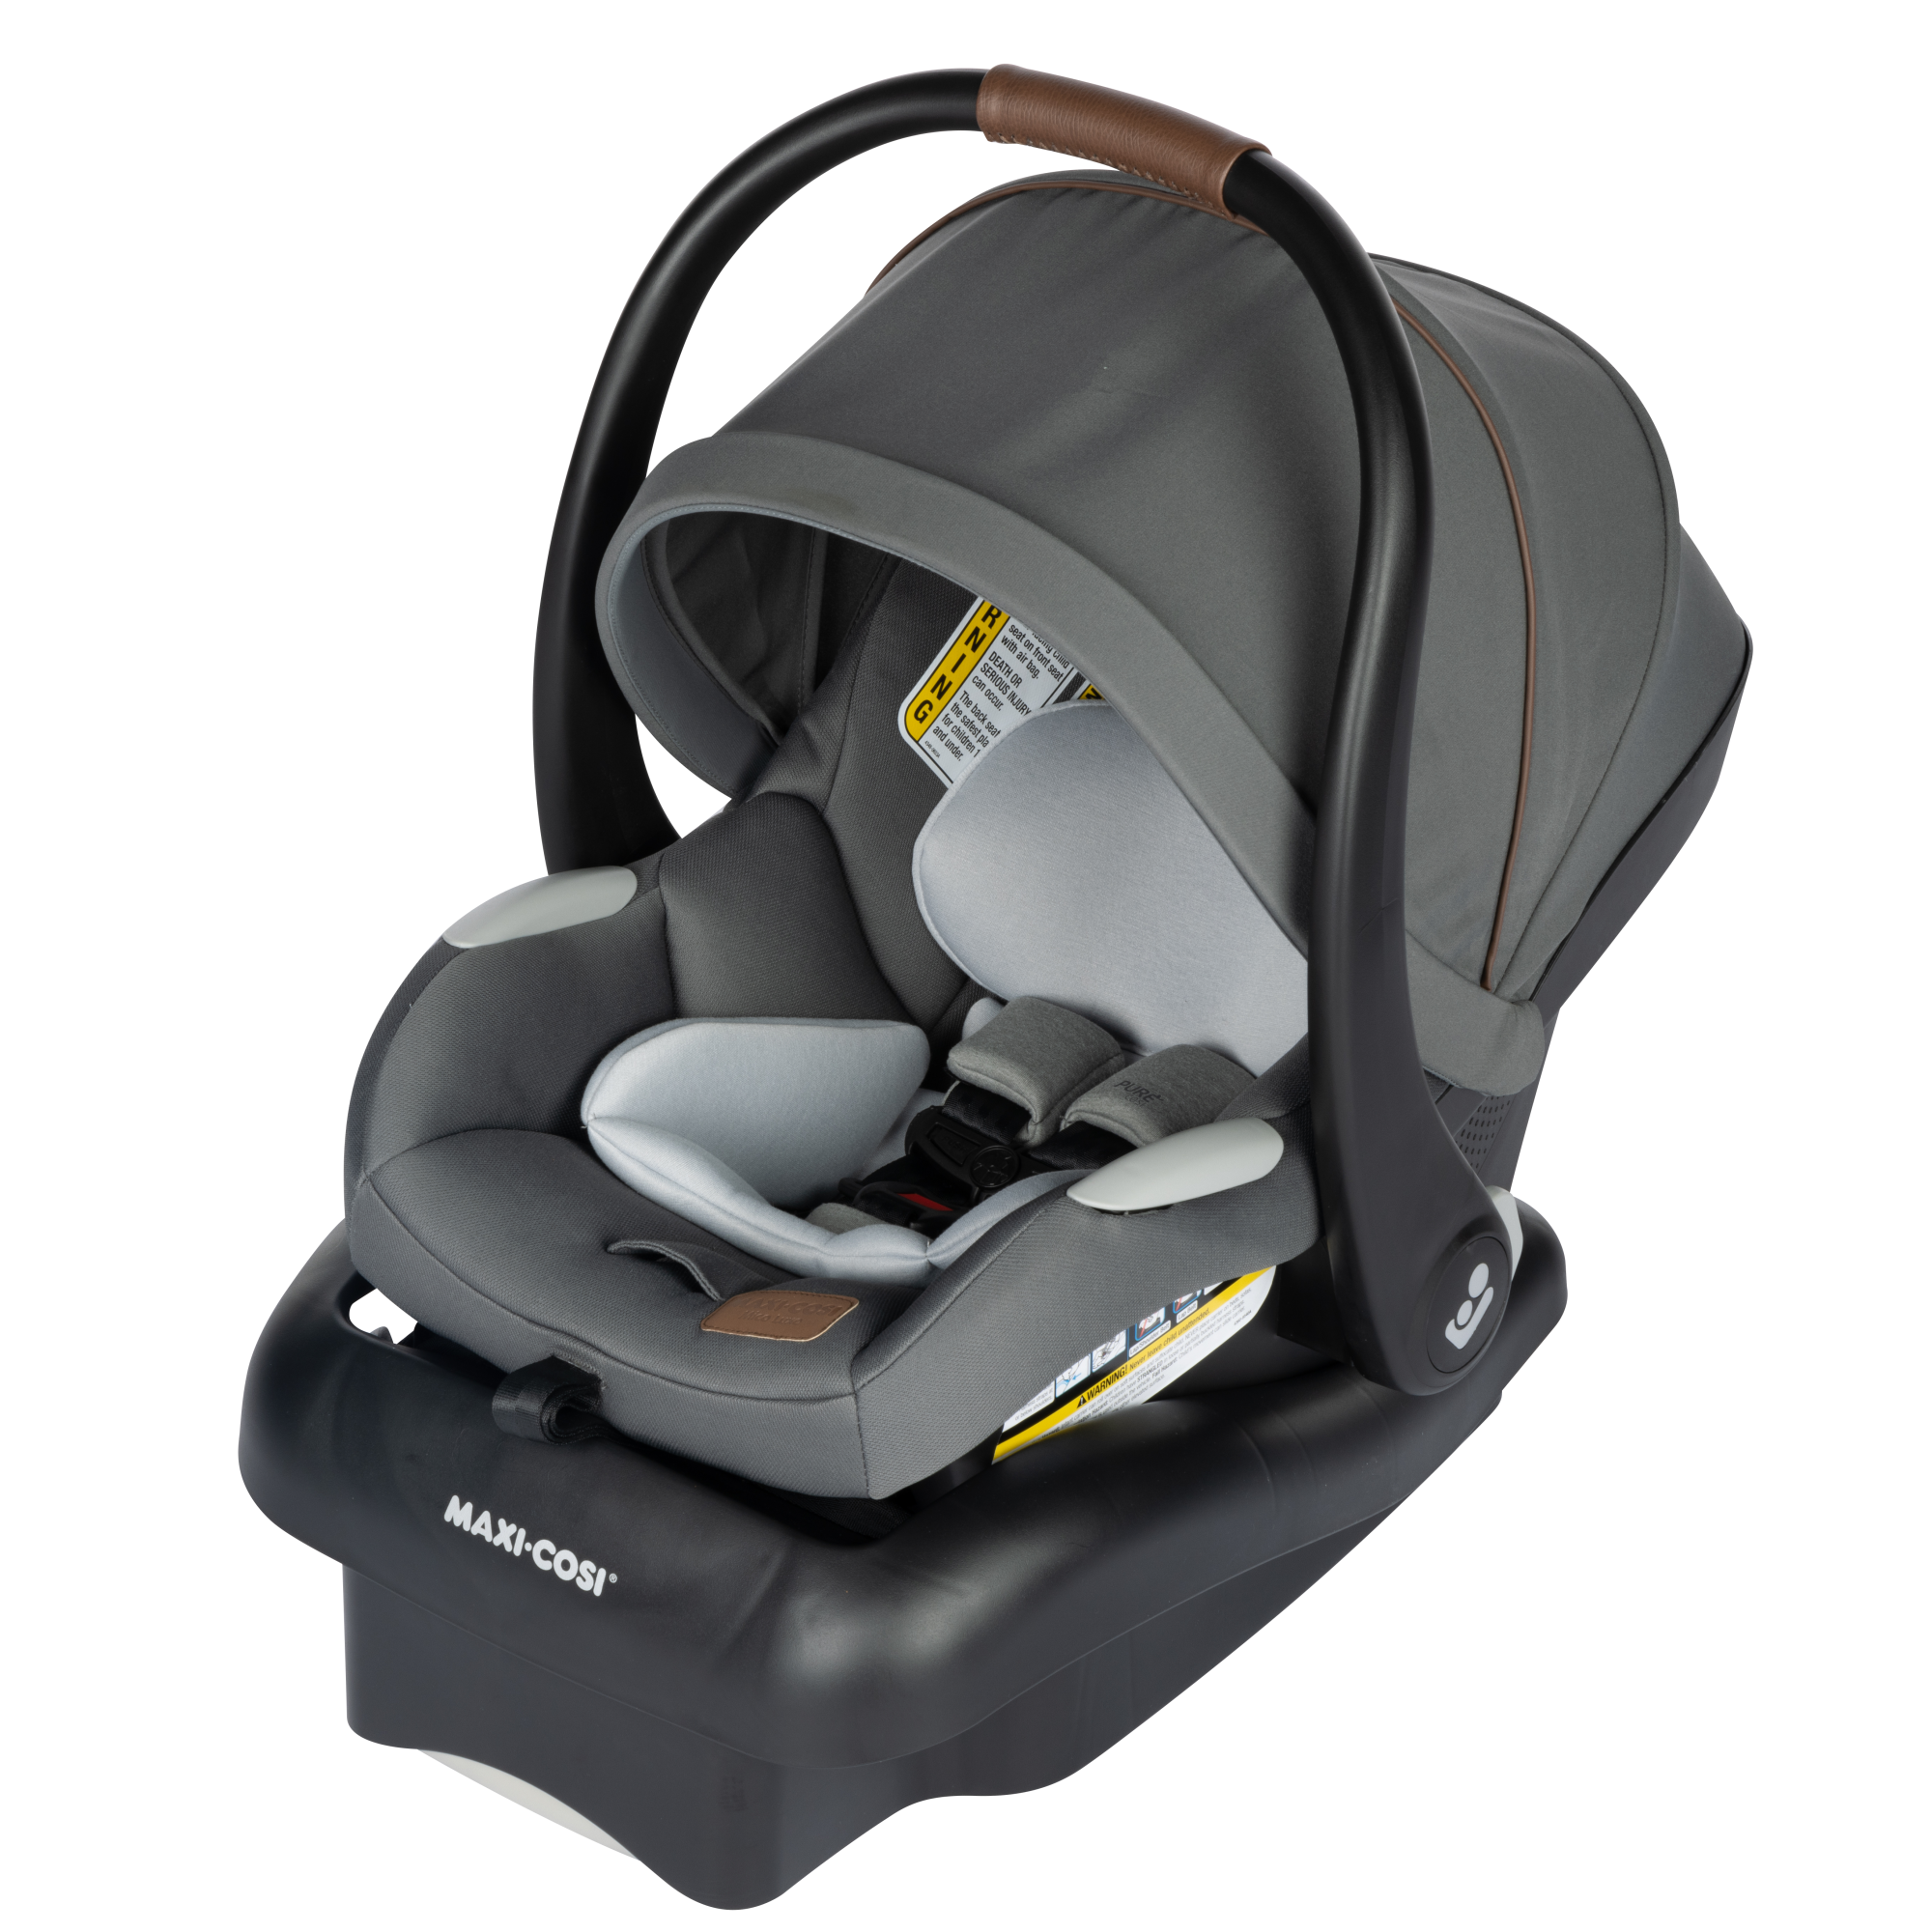 Mico™ Luxe Infant Car Seat - Stone Glow